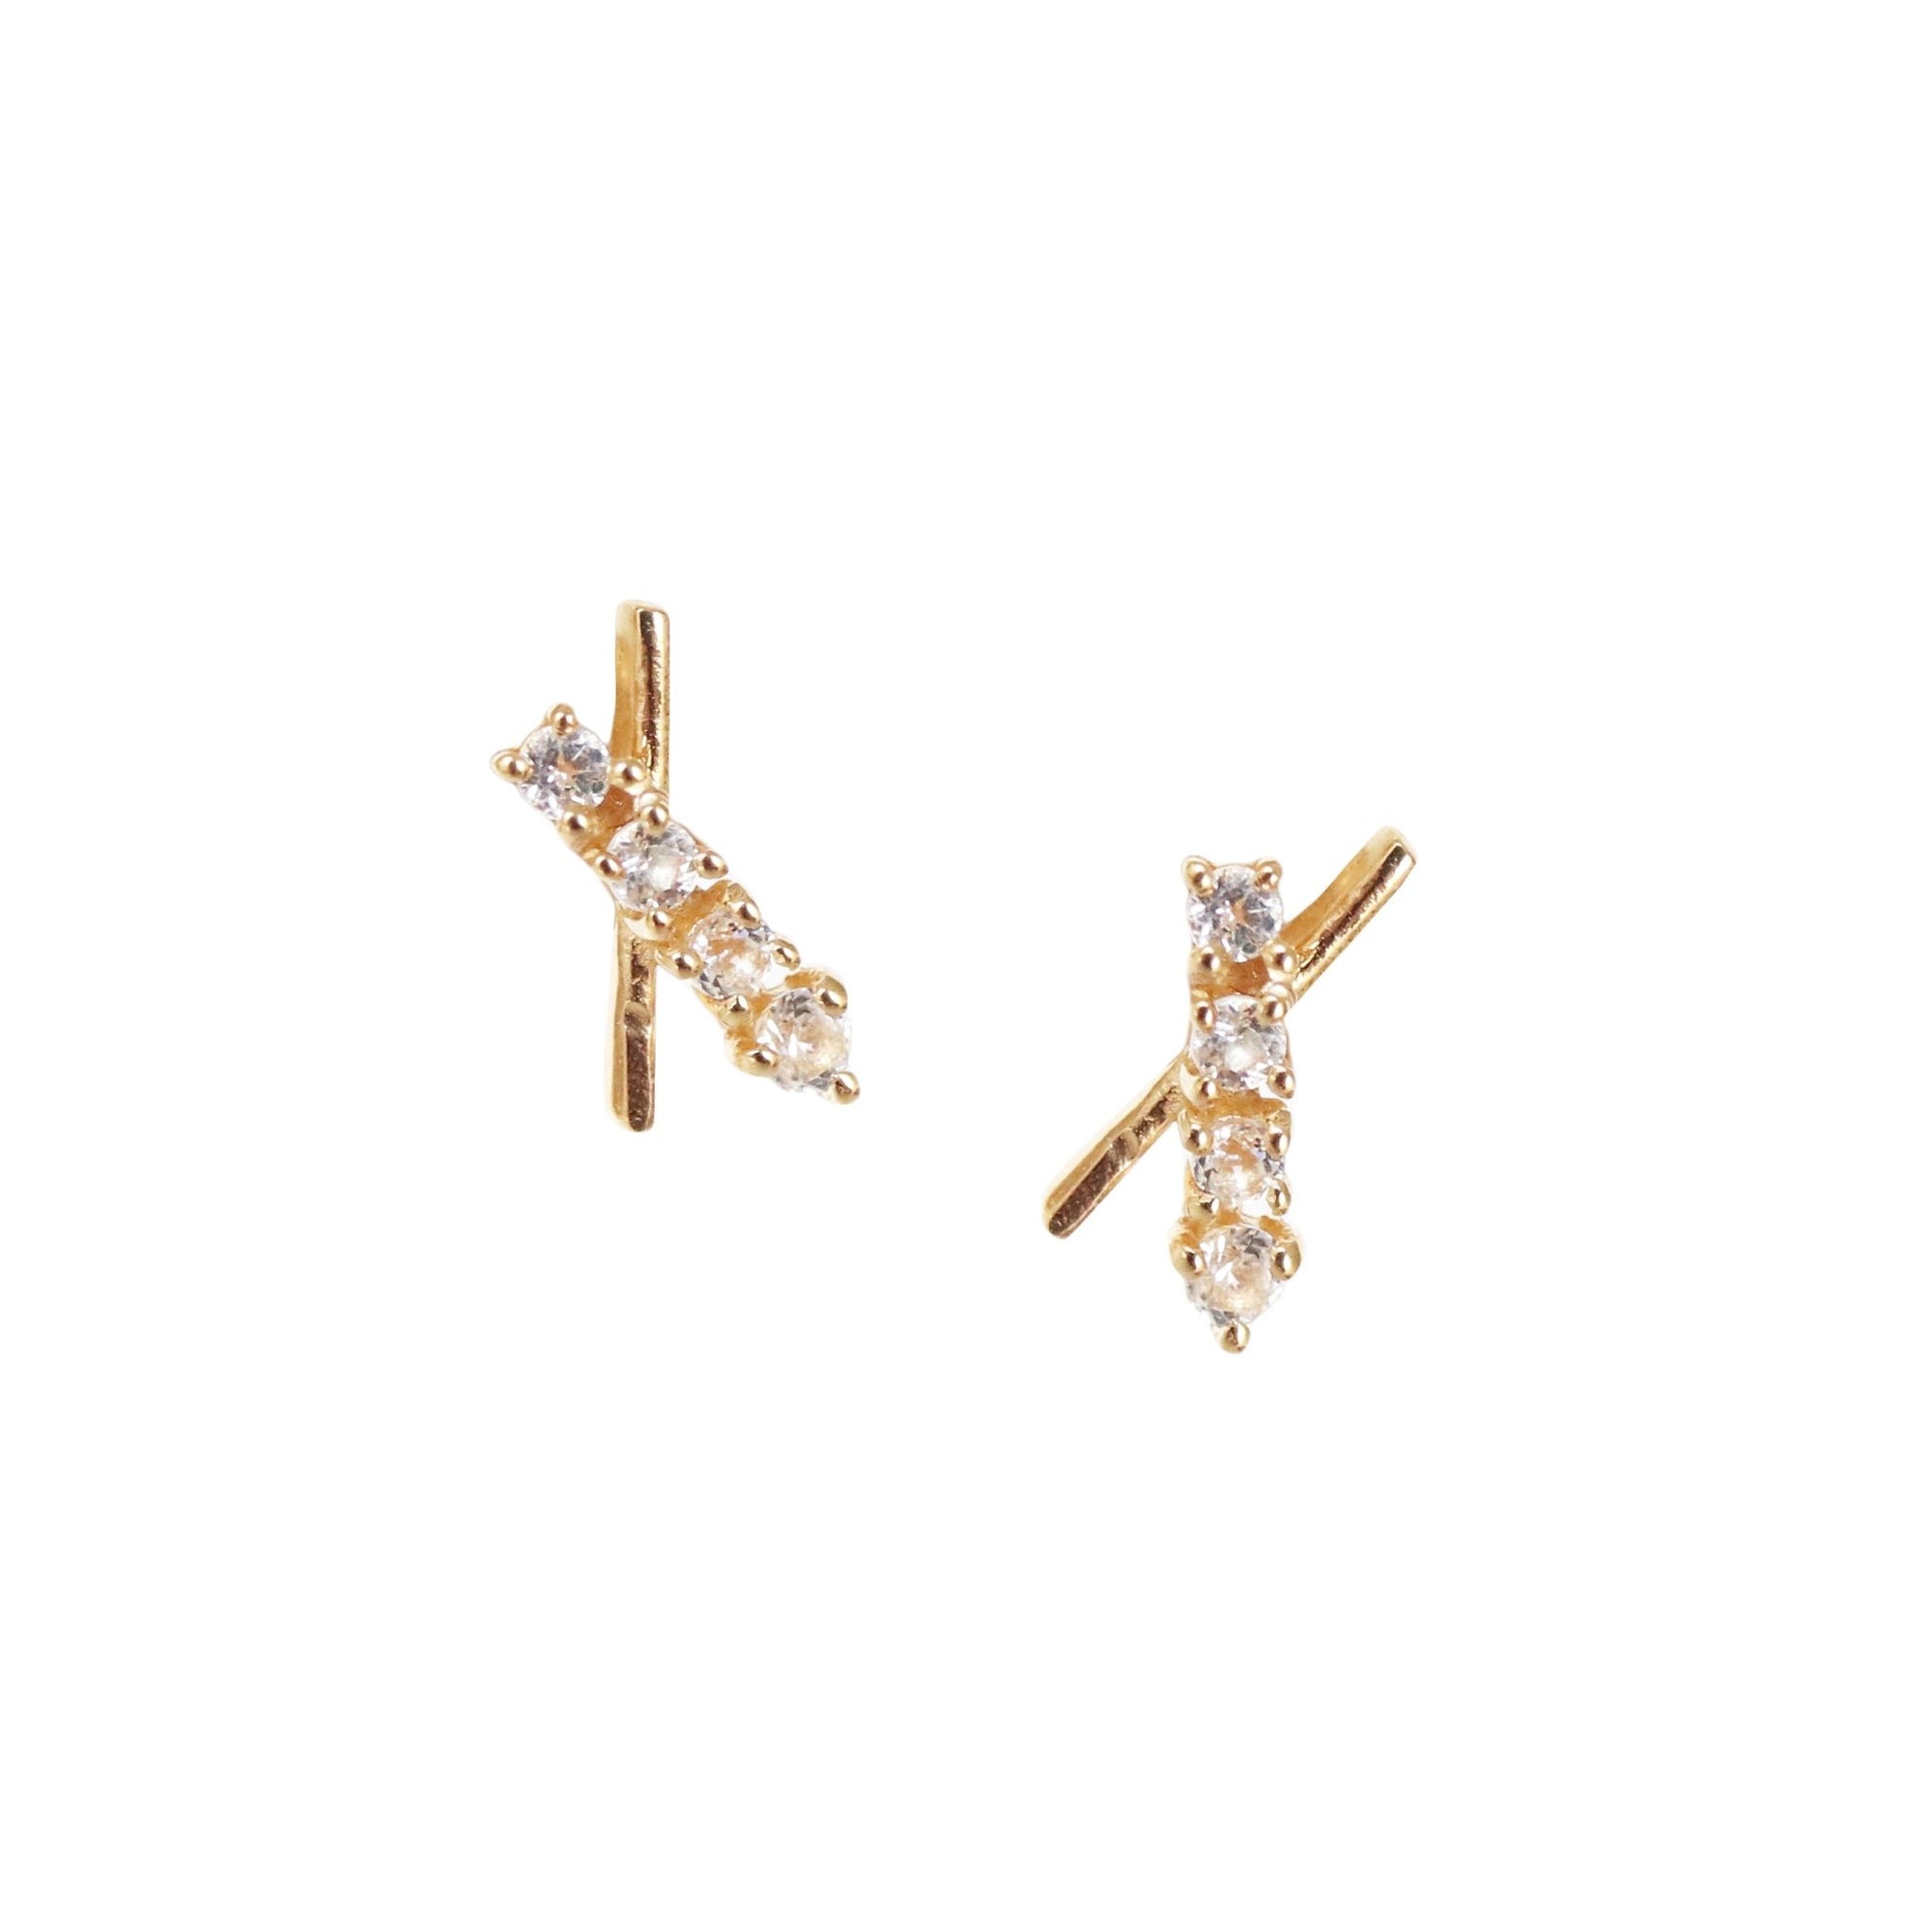 TINY DREAM STARDUST STUDS - CUBIC ZIRCONIA & GOLD - SO PRETTY CARA COTTER